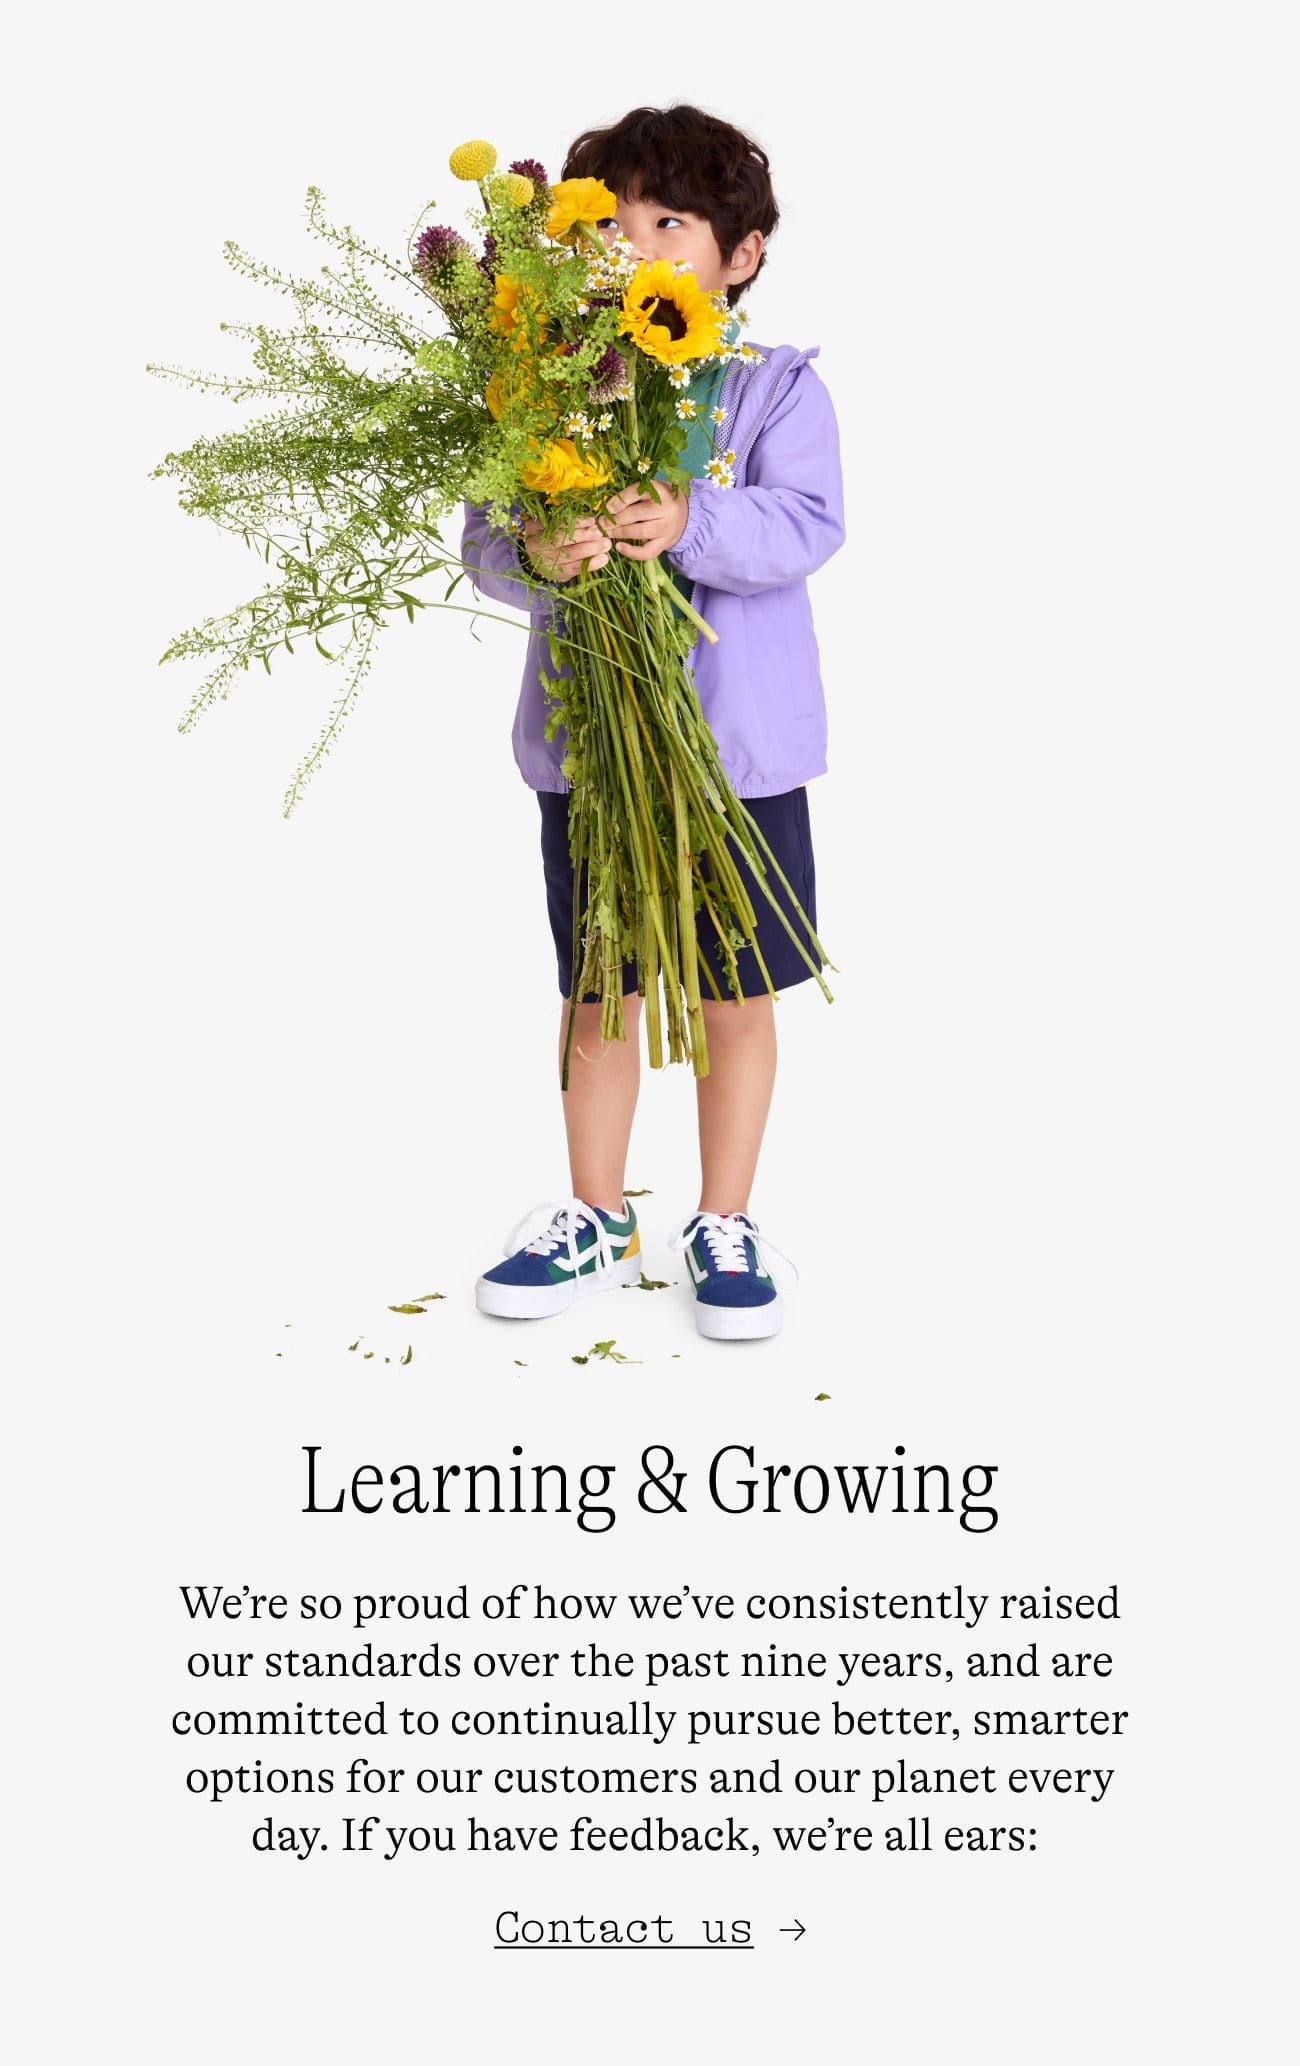 Learning & Growing. We’re so proud of how we’ve consistently raised our standards over the past nine years, and are committed to continually pursue better, smarter options for our customers and our planet every day. If you have feedback, we’re all ears:\xa0 Learn more